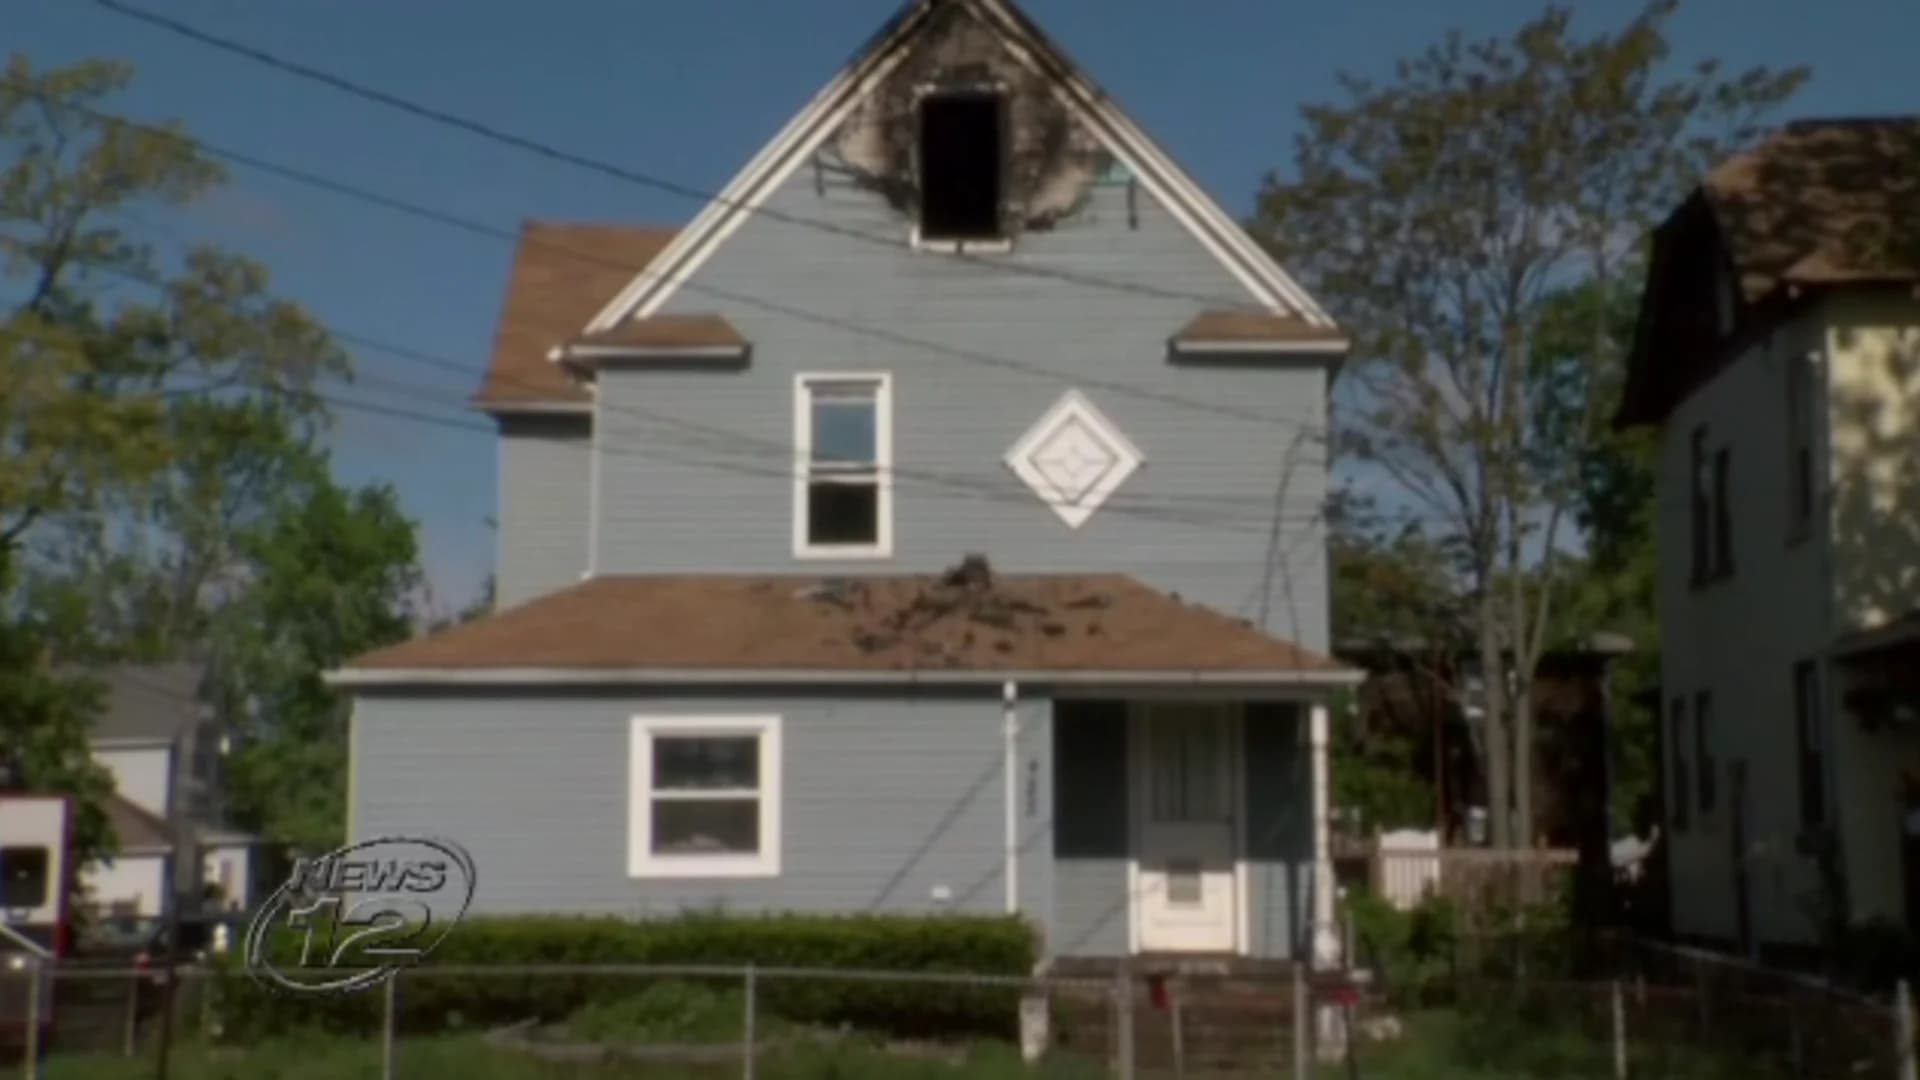 Early morning Keansburg house fire injures 2 people